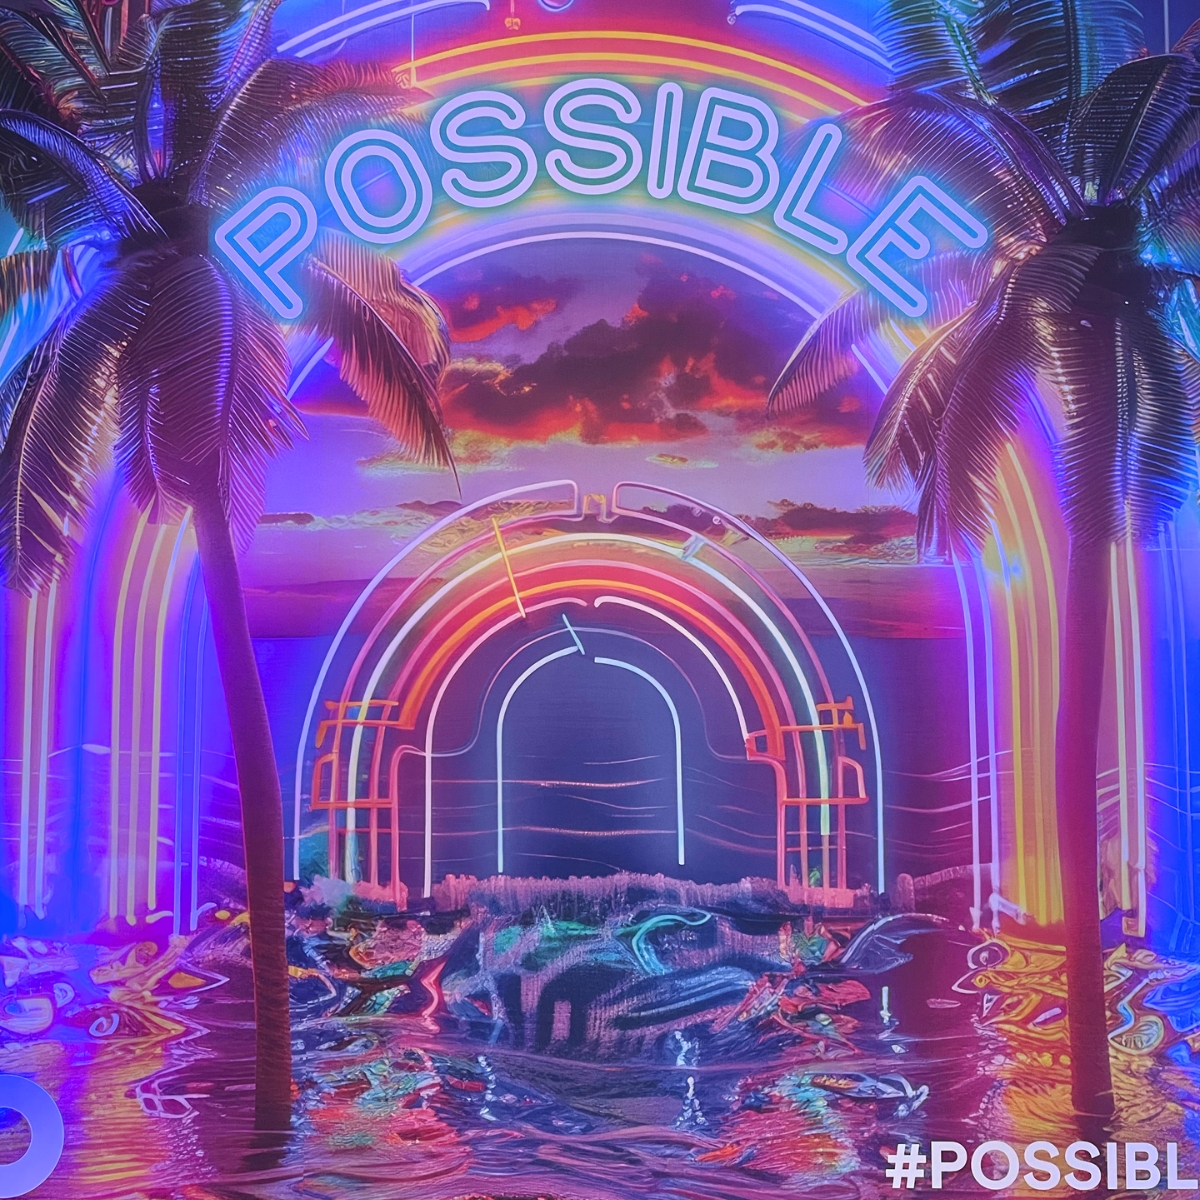 We had a blast connecting with industry peers at #Possible2024 this week!

A special thank you to Rob Davis from @NovusMediaLLC Media for leading such a memorable masterclass around #AI innovations with our very own Josh Hare.

It was an honor to partner with @PossibleEvent on…